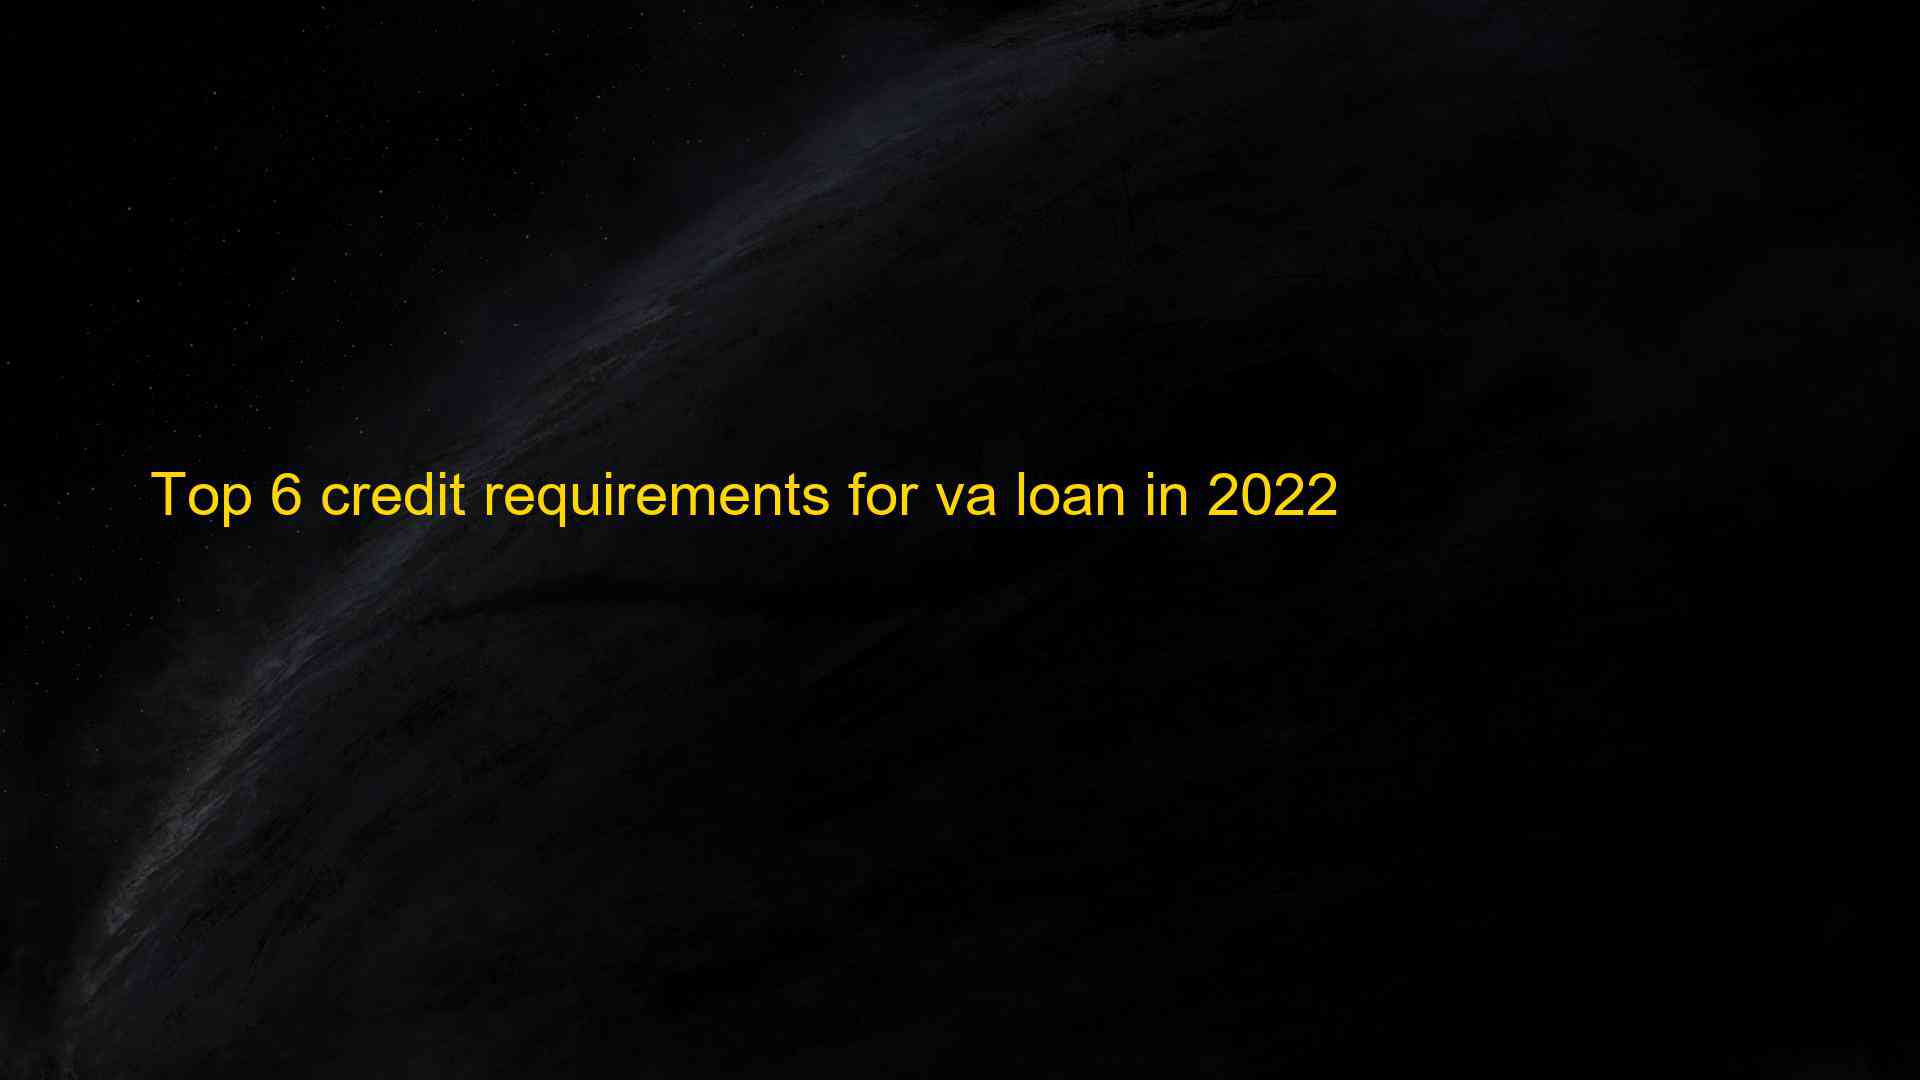 Top 6 credit requirements for va loan in 2022 1660194348